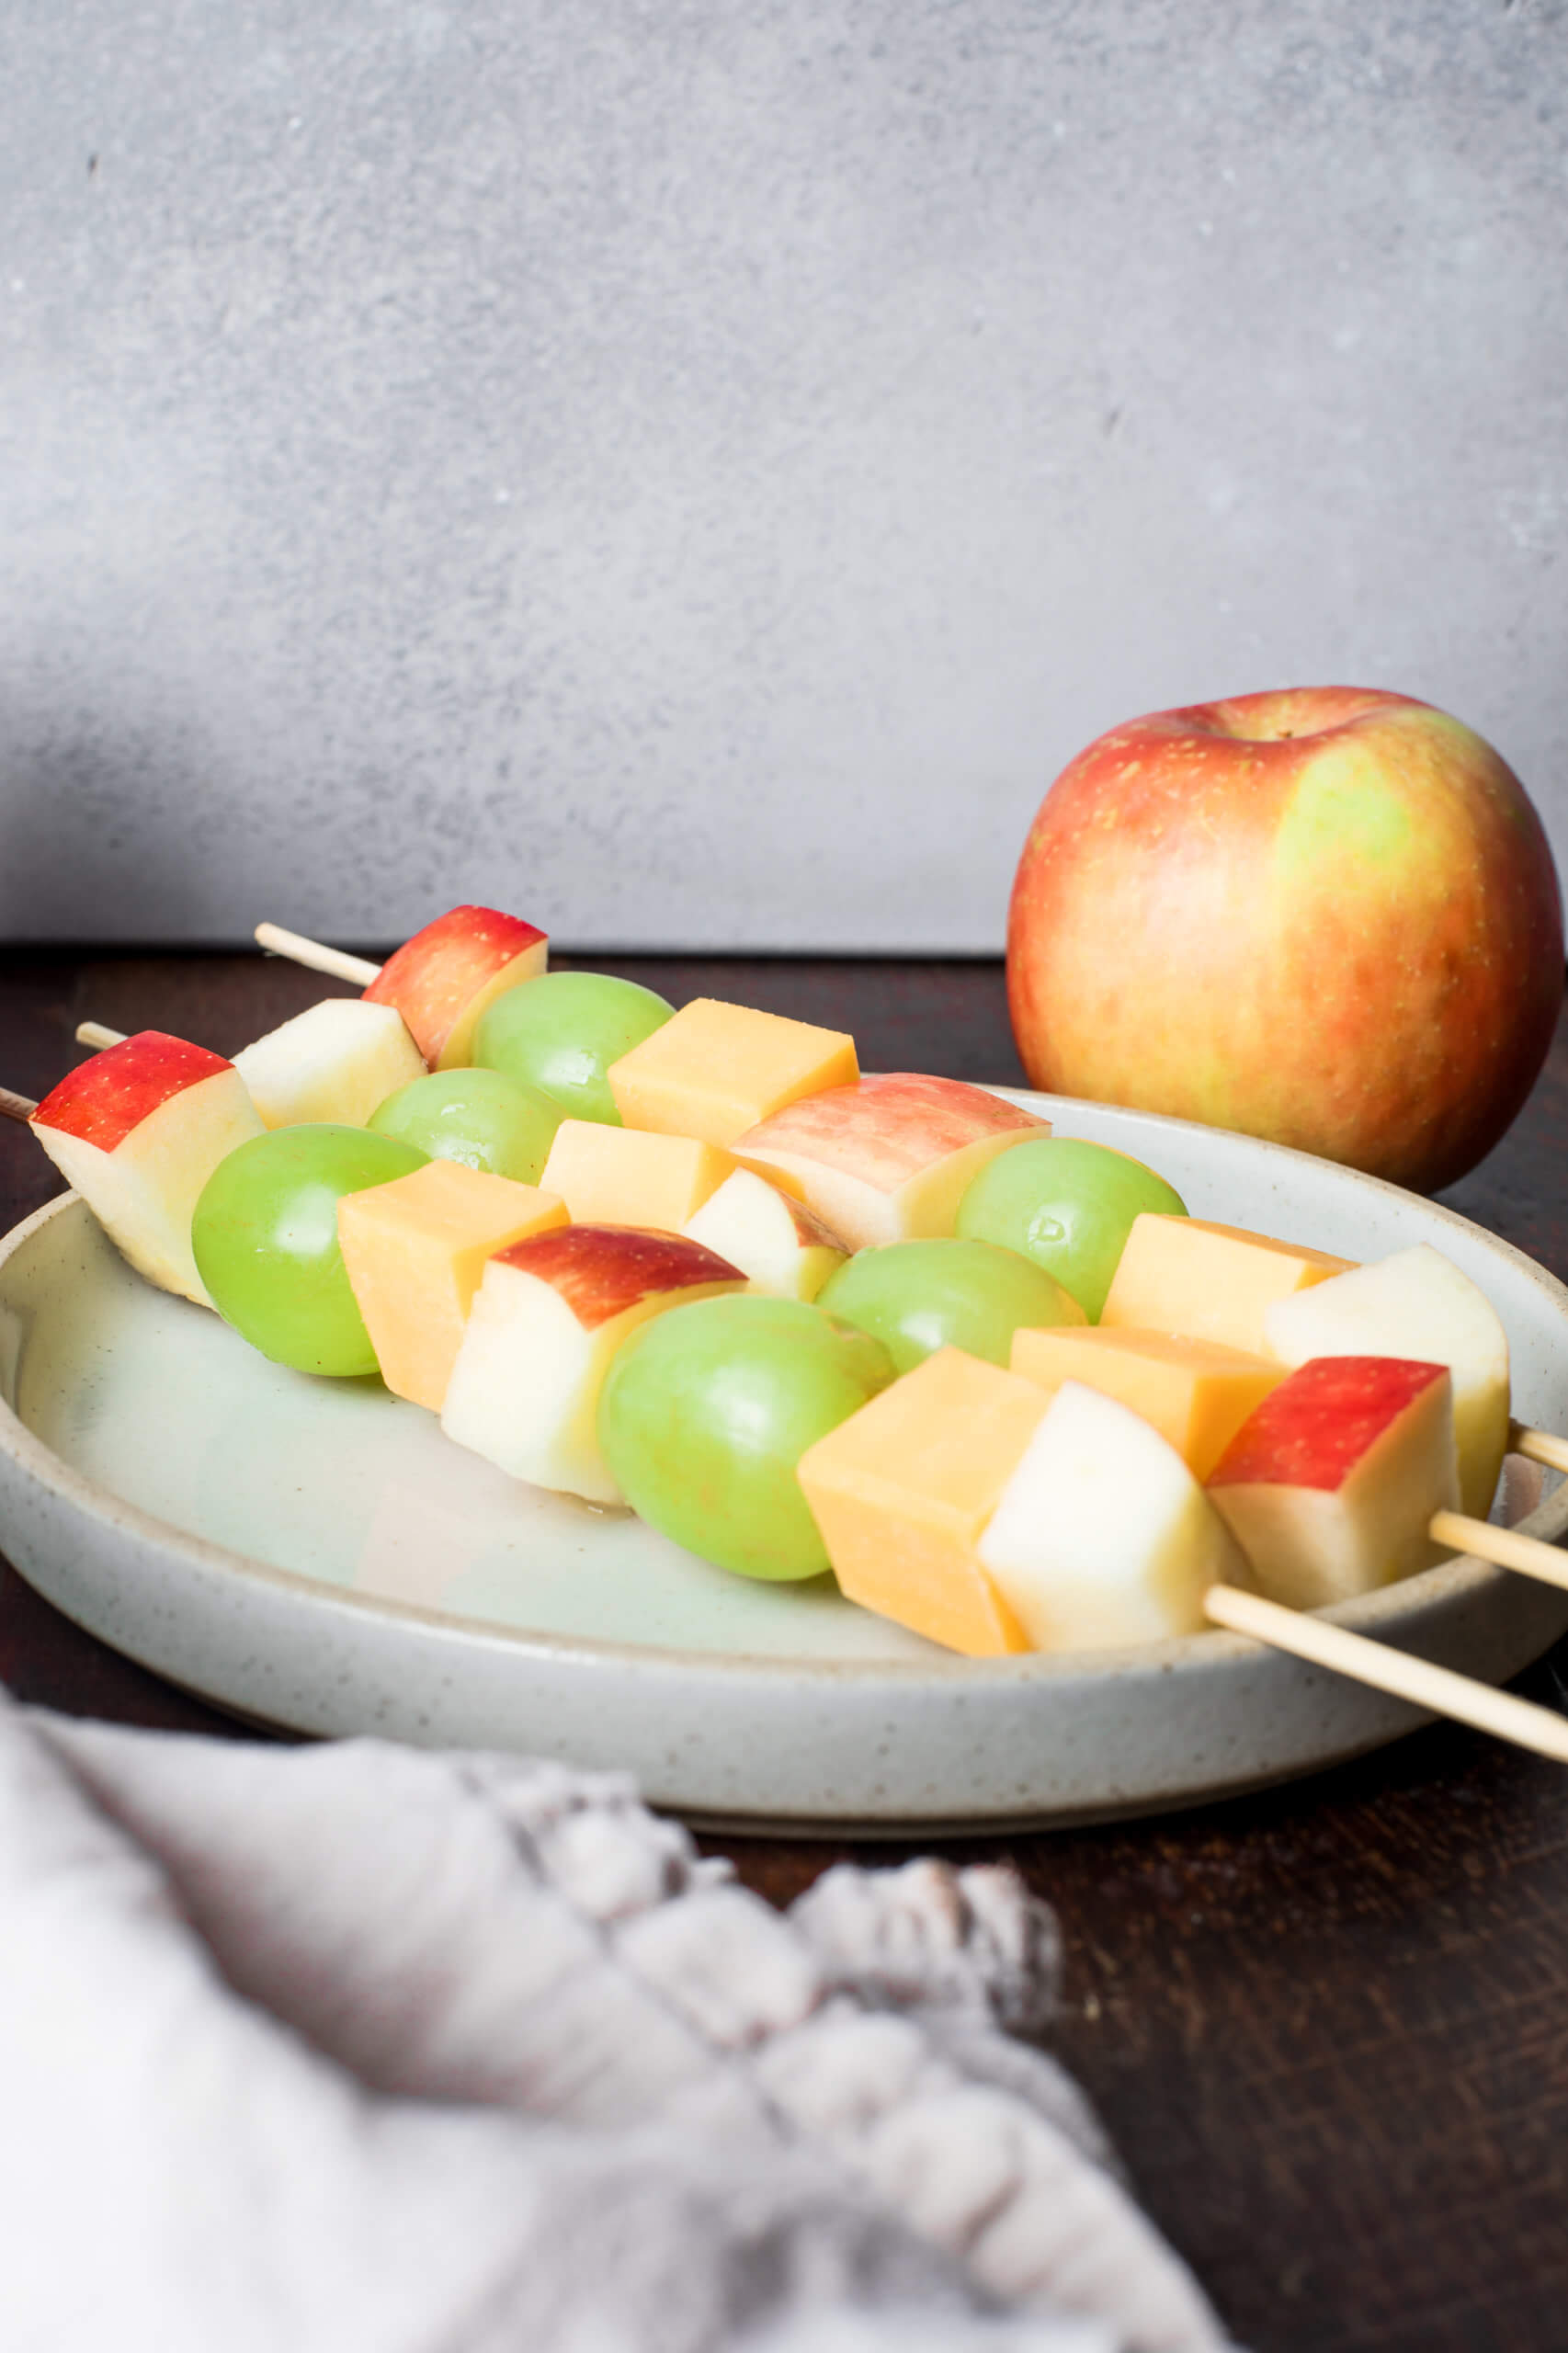 Fruit kabobs with apples, grapes, cheese, on a serving plate.